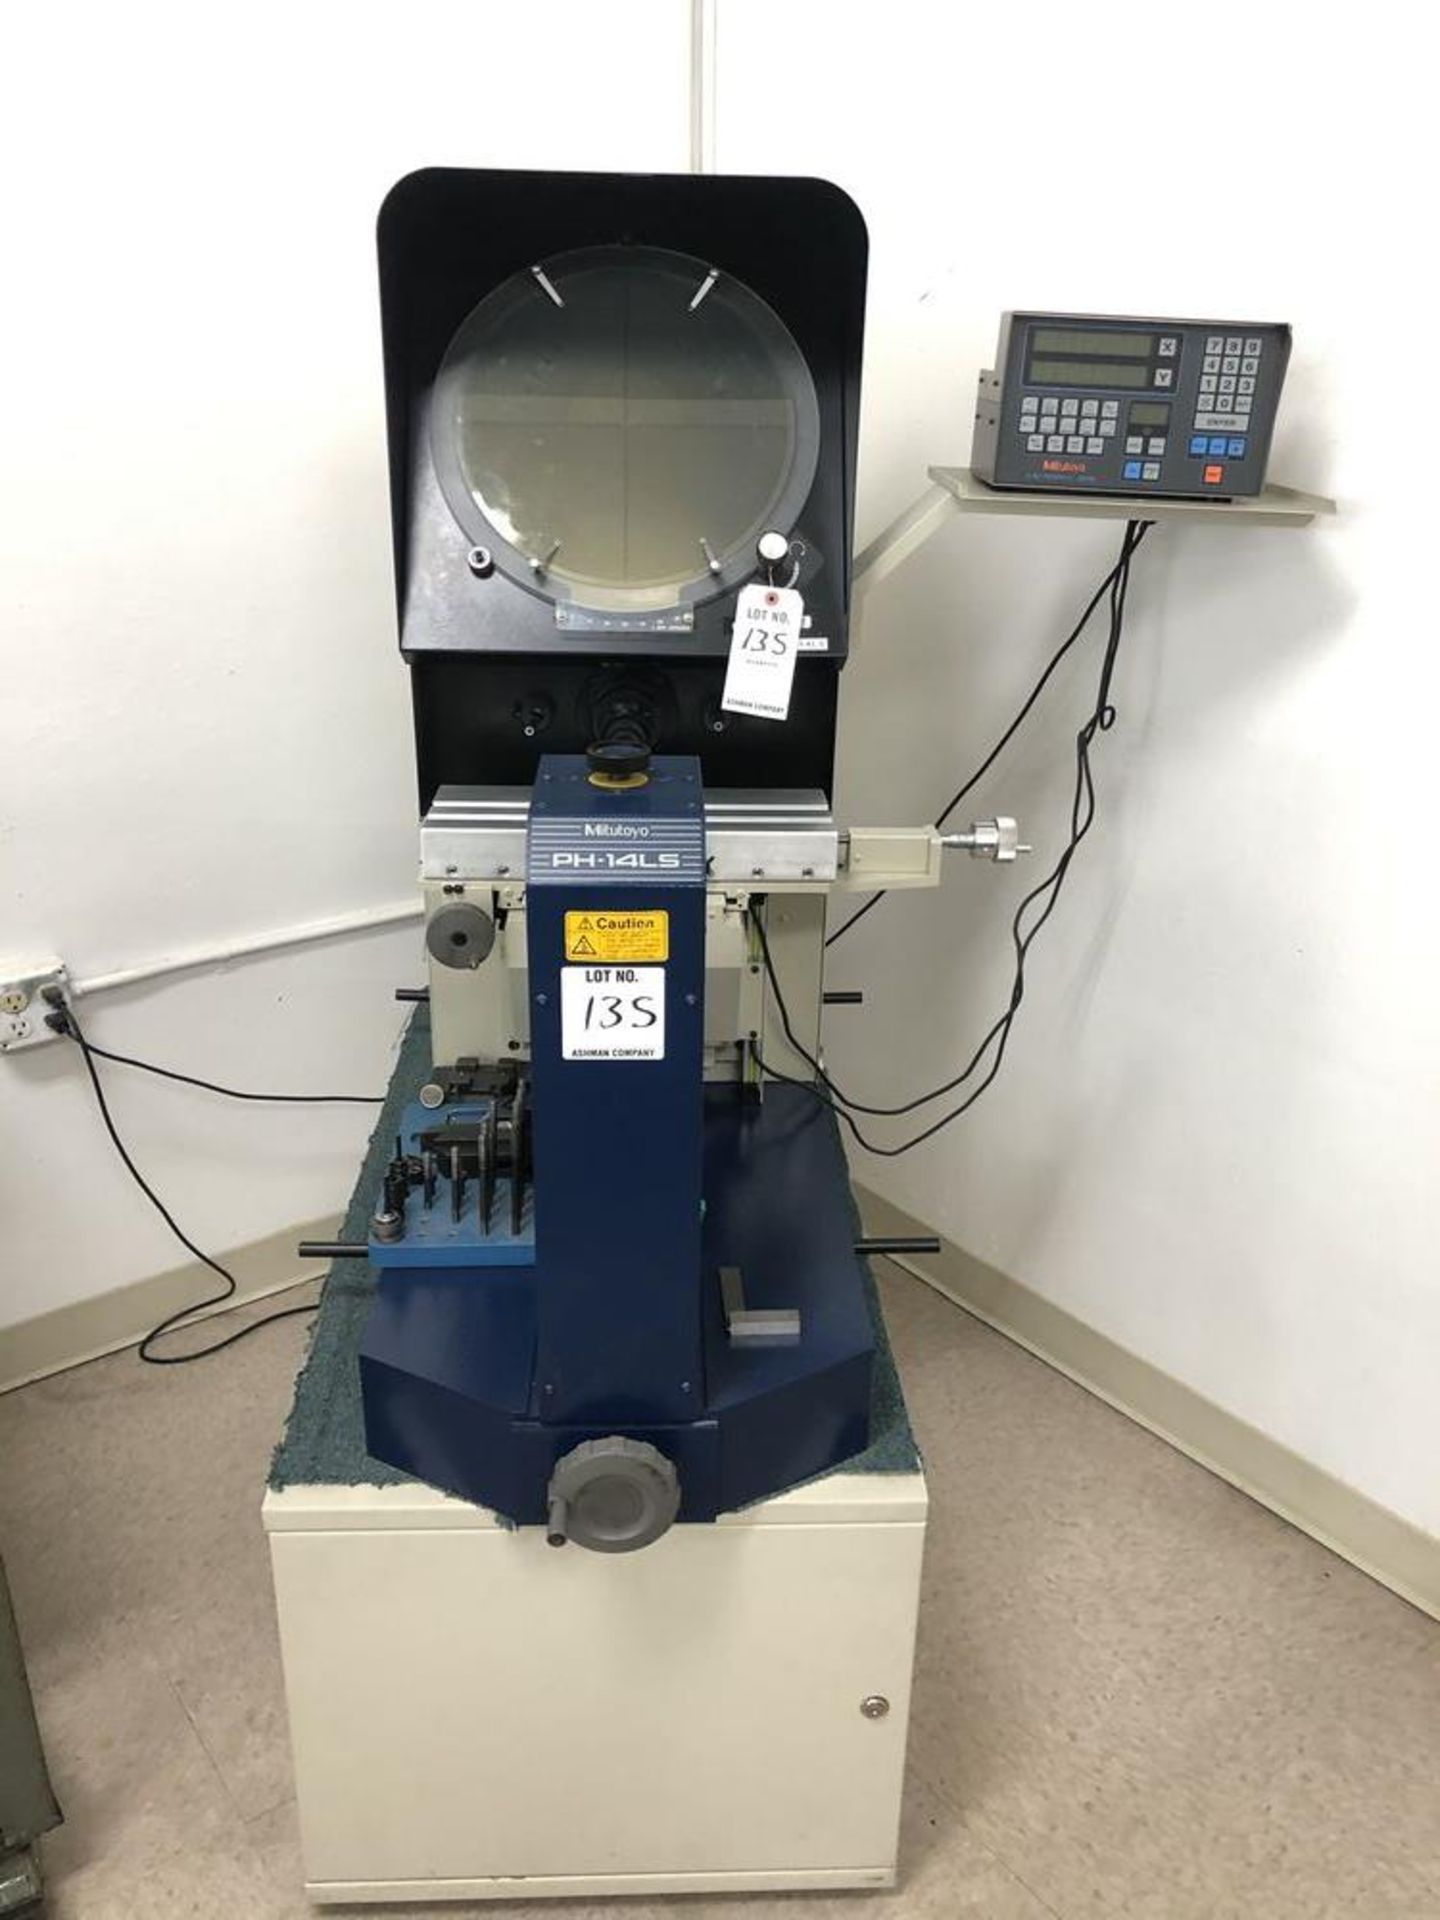 (1) Mitutoyo PH14LS optical comparator, Mitutoyo micropak D.R.O., with tooling S/N-200168